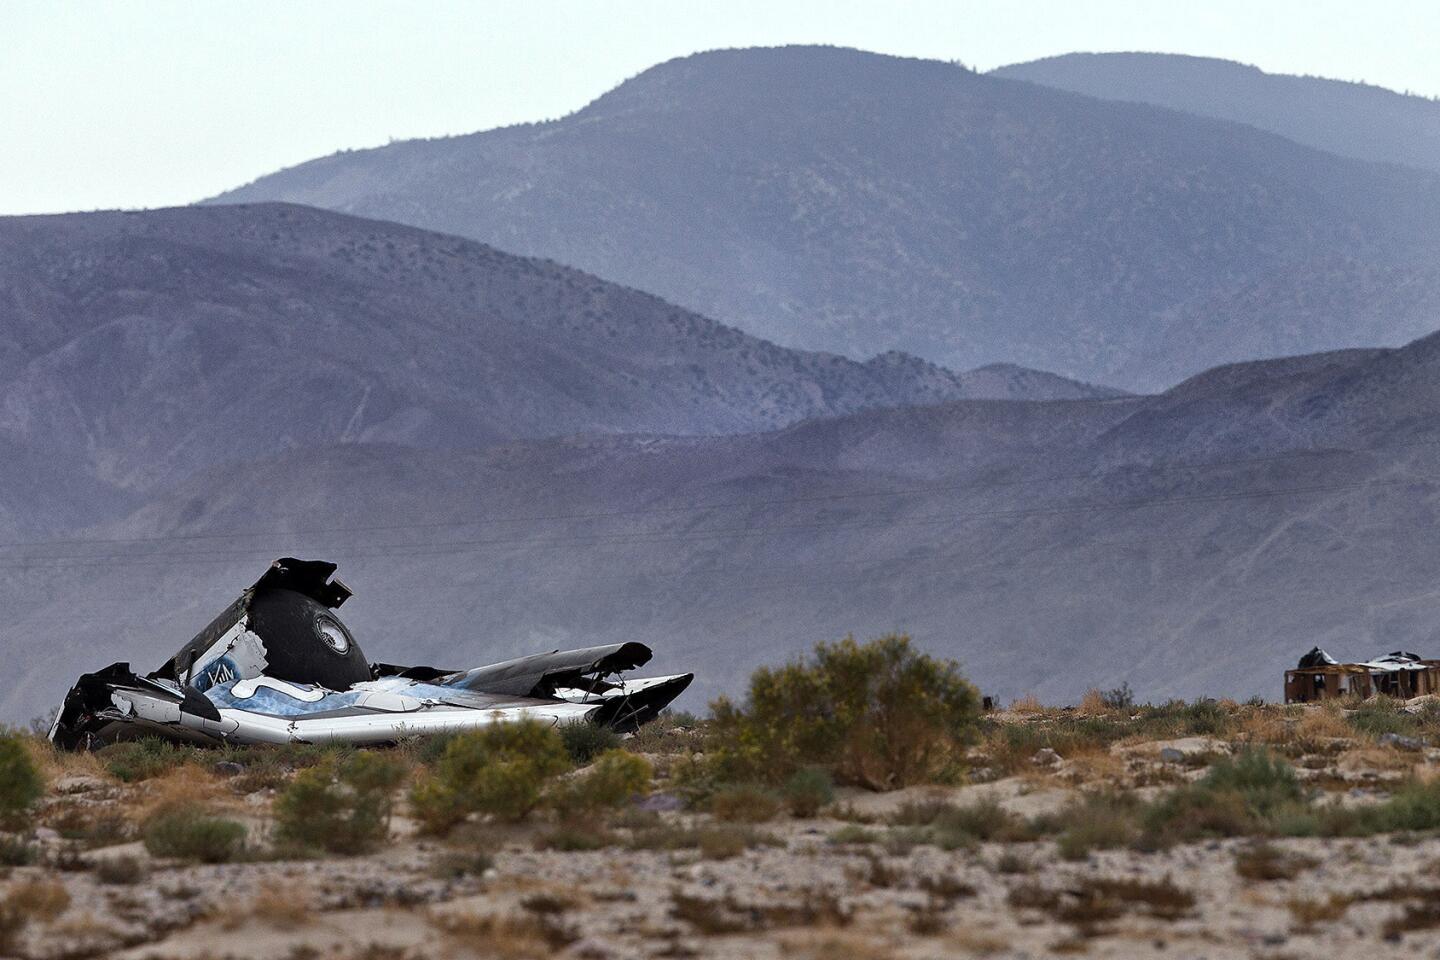 Virgin Galactic's SpaceShipTwo crashes during test flight